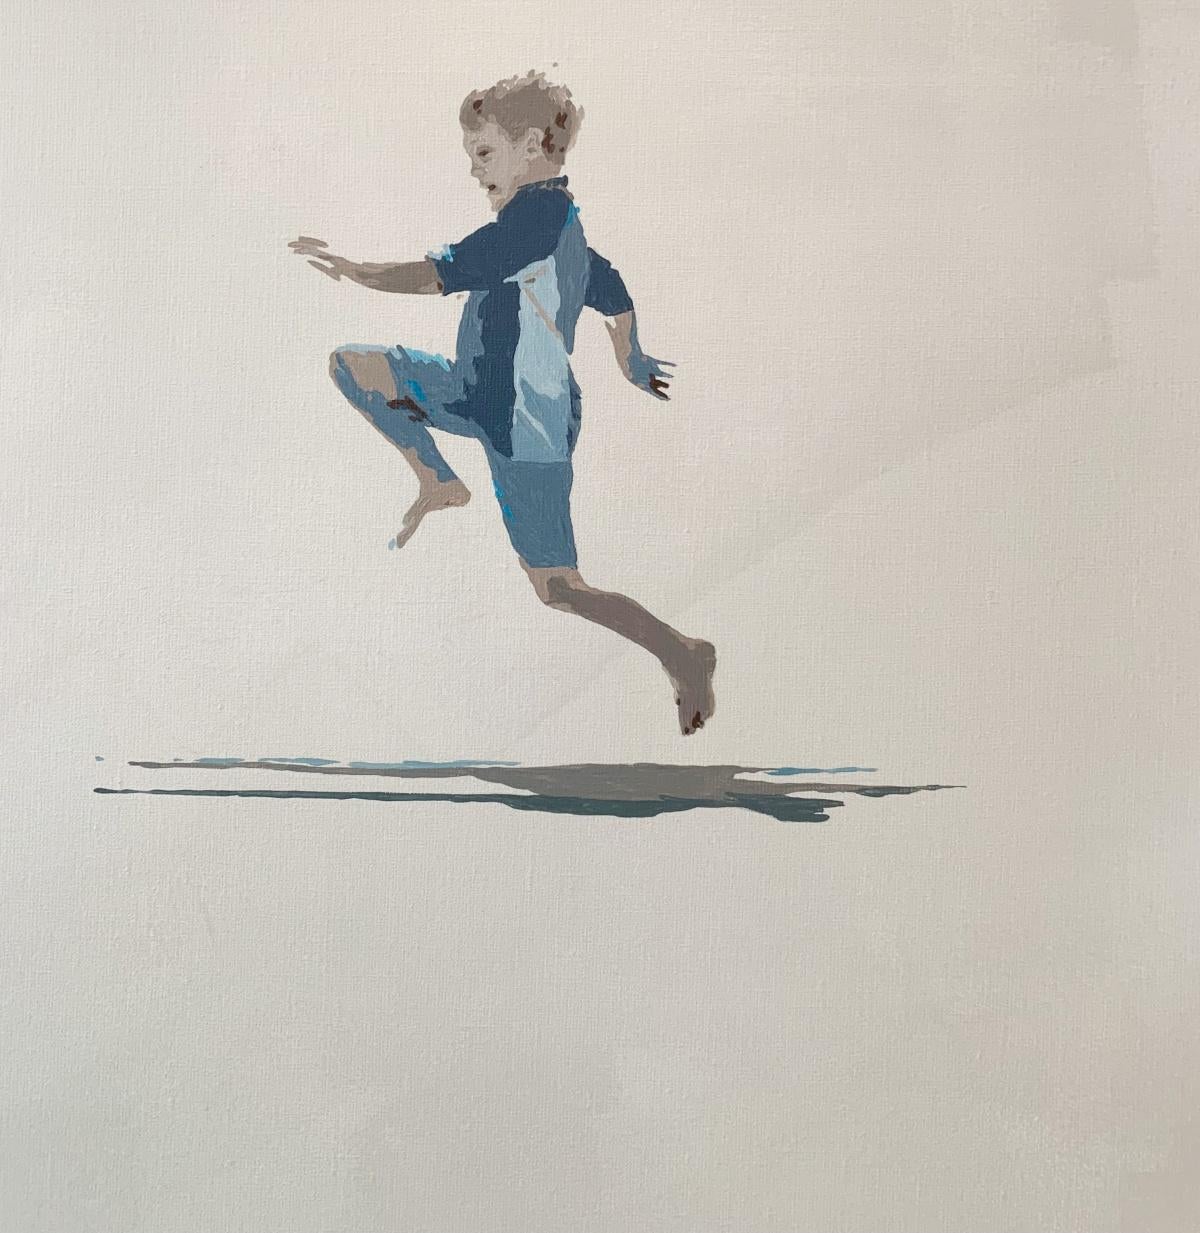 Contemporary figurative acrylic on canvas painting by Polish artist Joanna Woyda. Painting is in minimalistic, pop art style. The artwork depicts a boy playfully running on a beach. Color of the composition is monochromatic, it's mainly in beige and